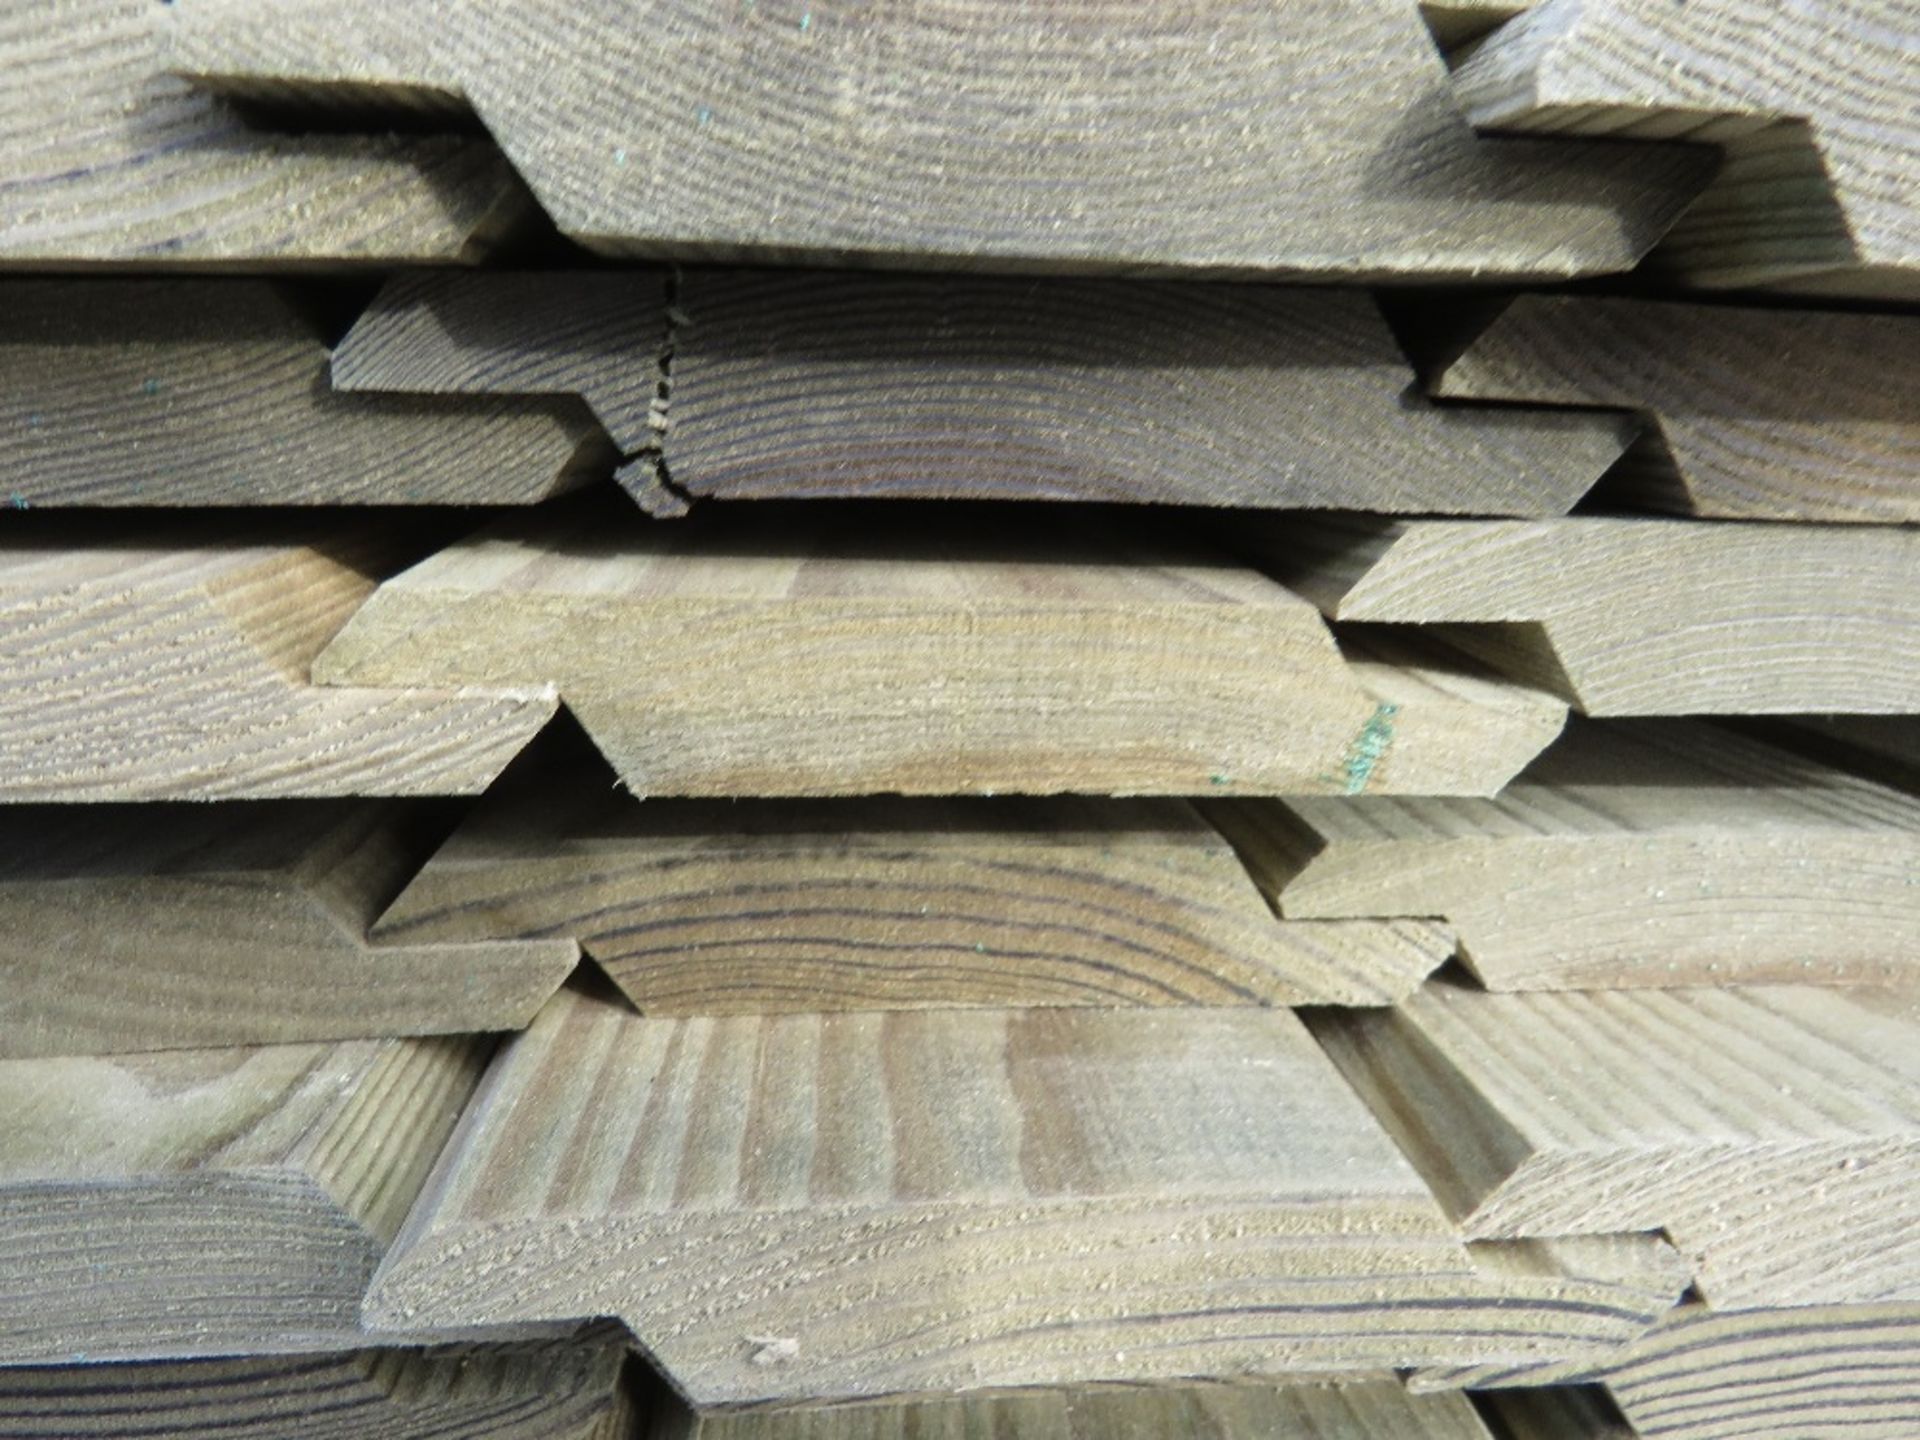 LARGE PACK OF PRESSURE TREATED SHIPLAP TYPE TIMBER CLADDING BOARDS. 1.73M LENGTH X 100MM WIDTH APPRO - Image 3 of 3